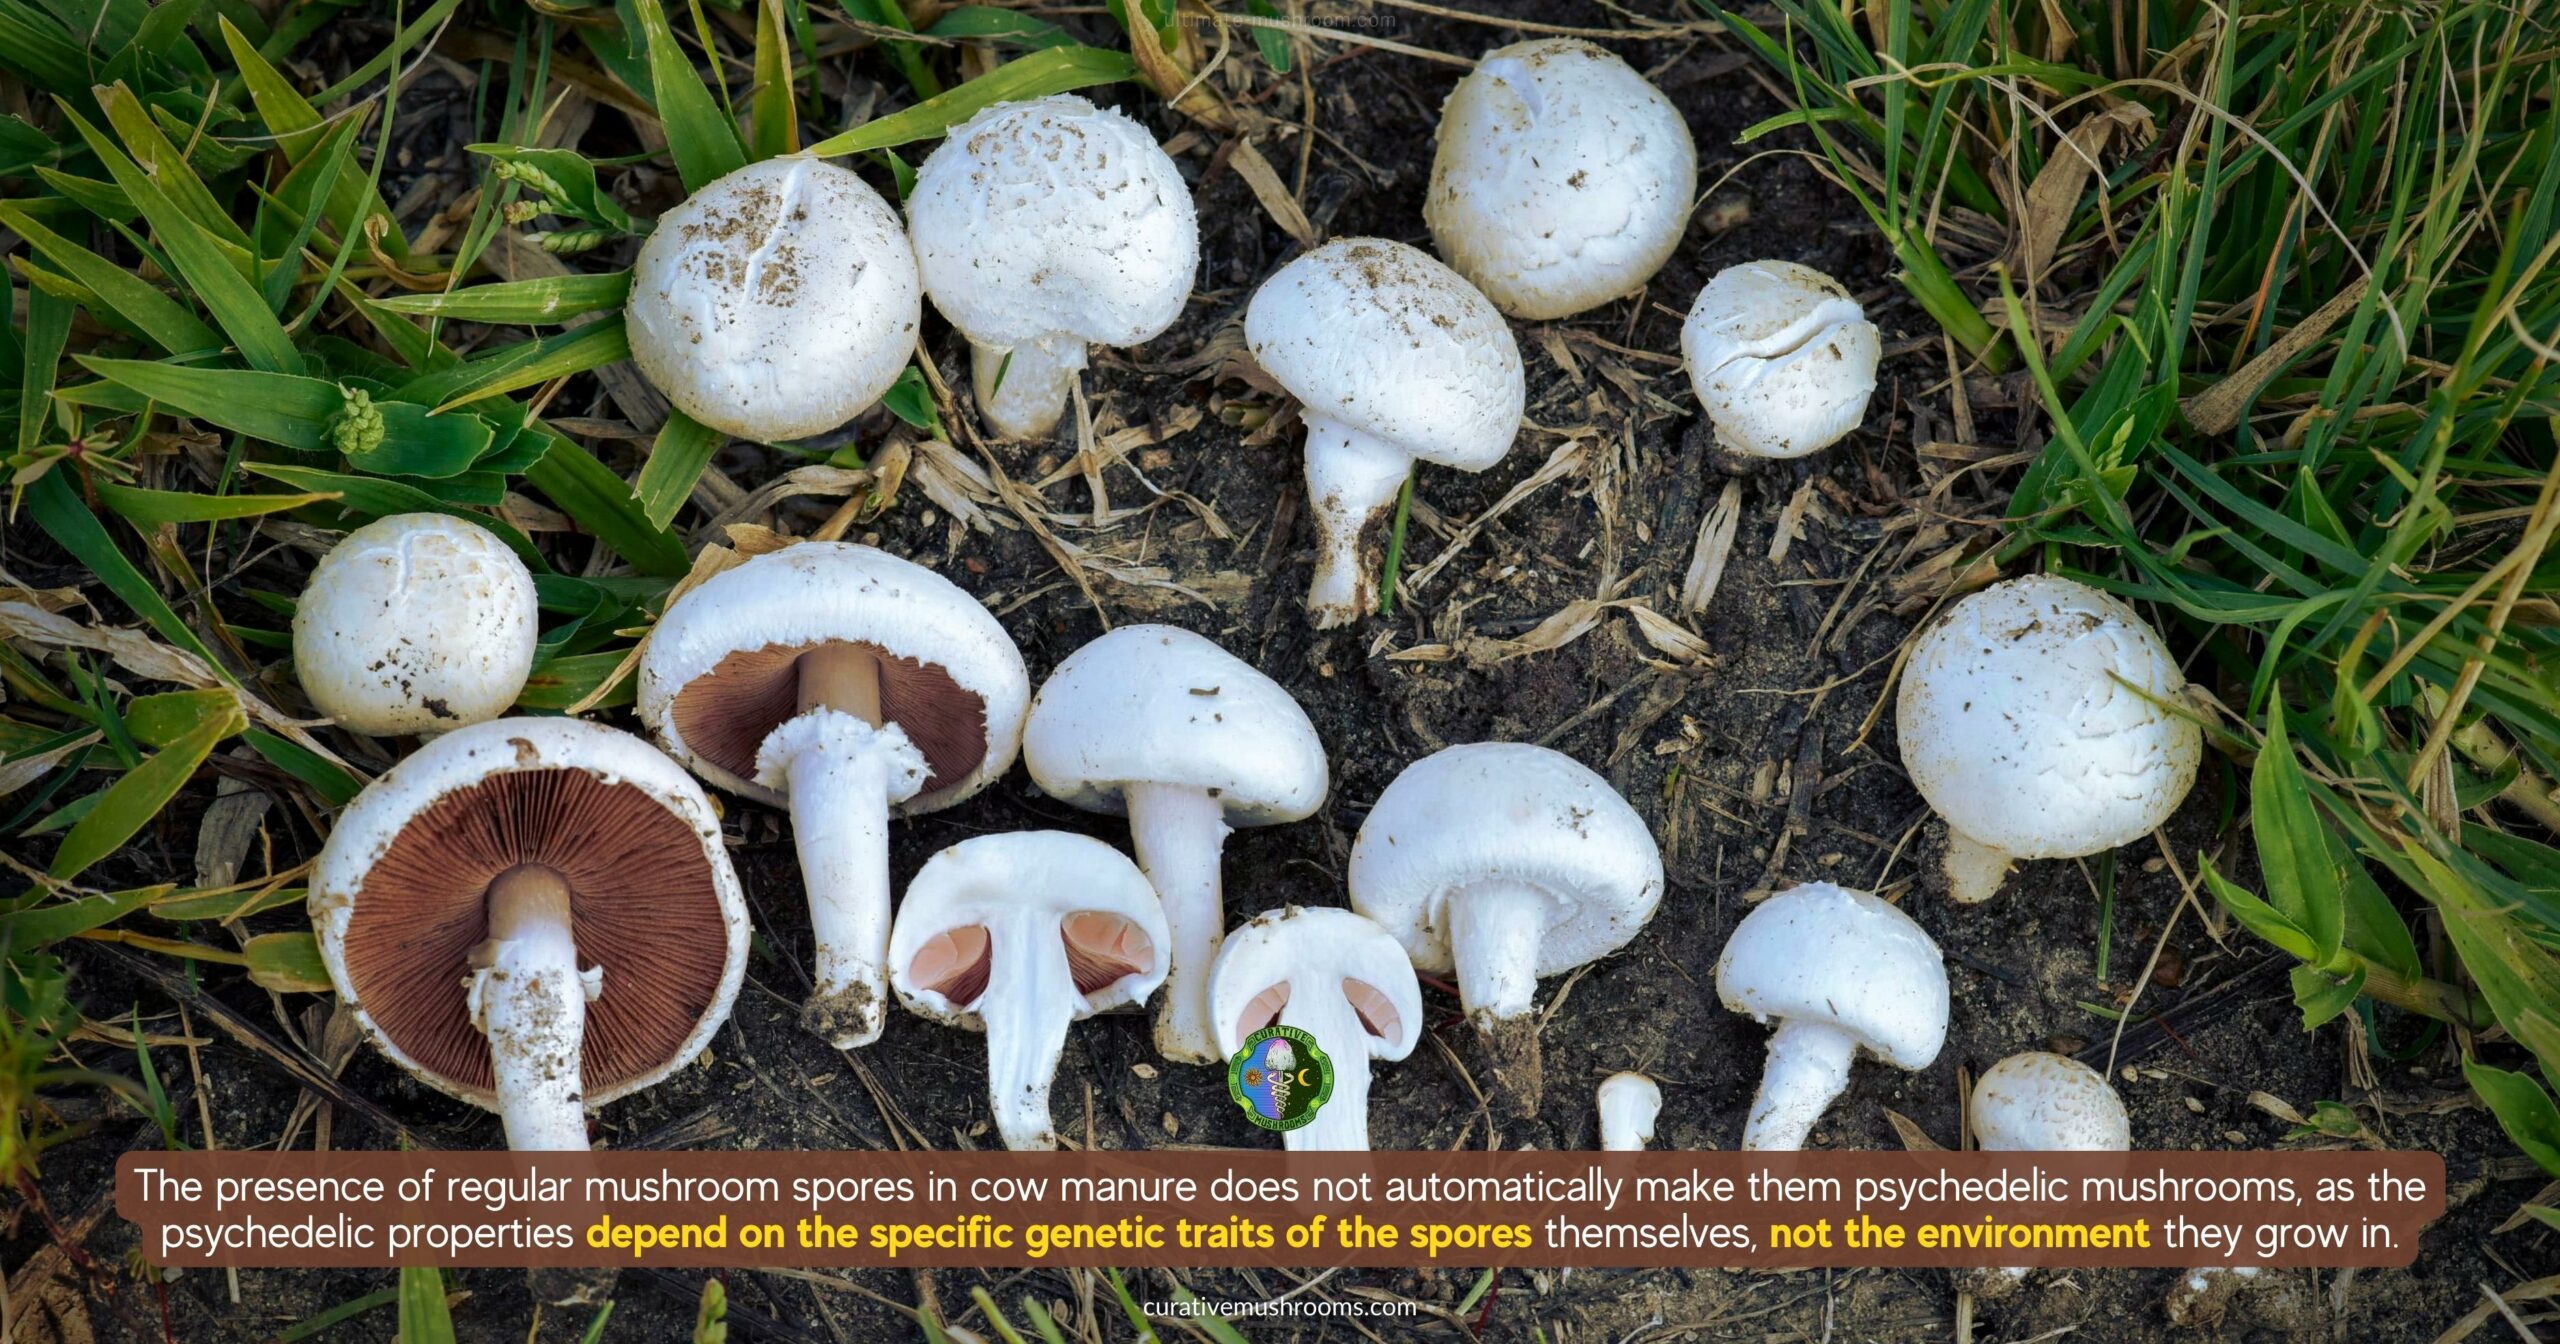 If regular mushroom spores grow from cow manure does that make them psychedelic mushrooms - depends on the specific genetic traits of the spores, not the environment